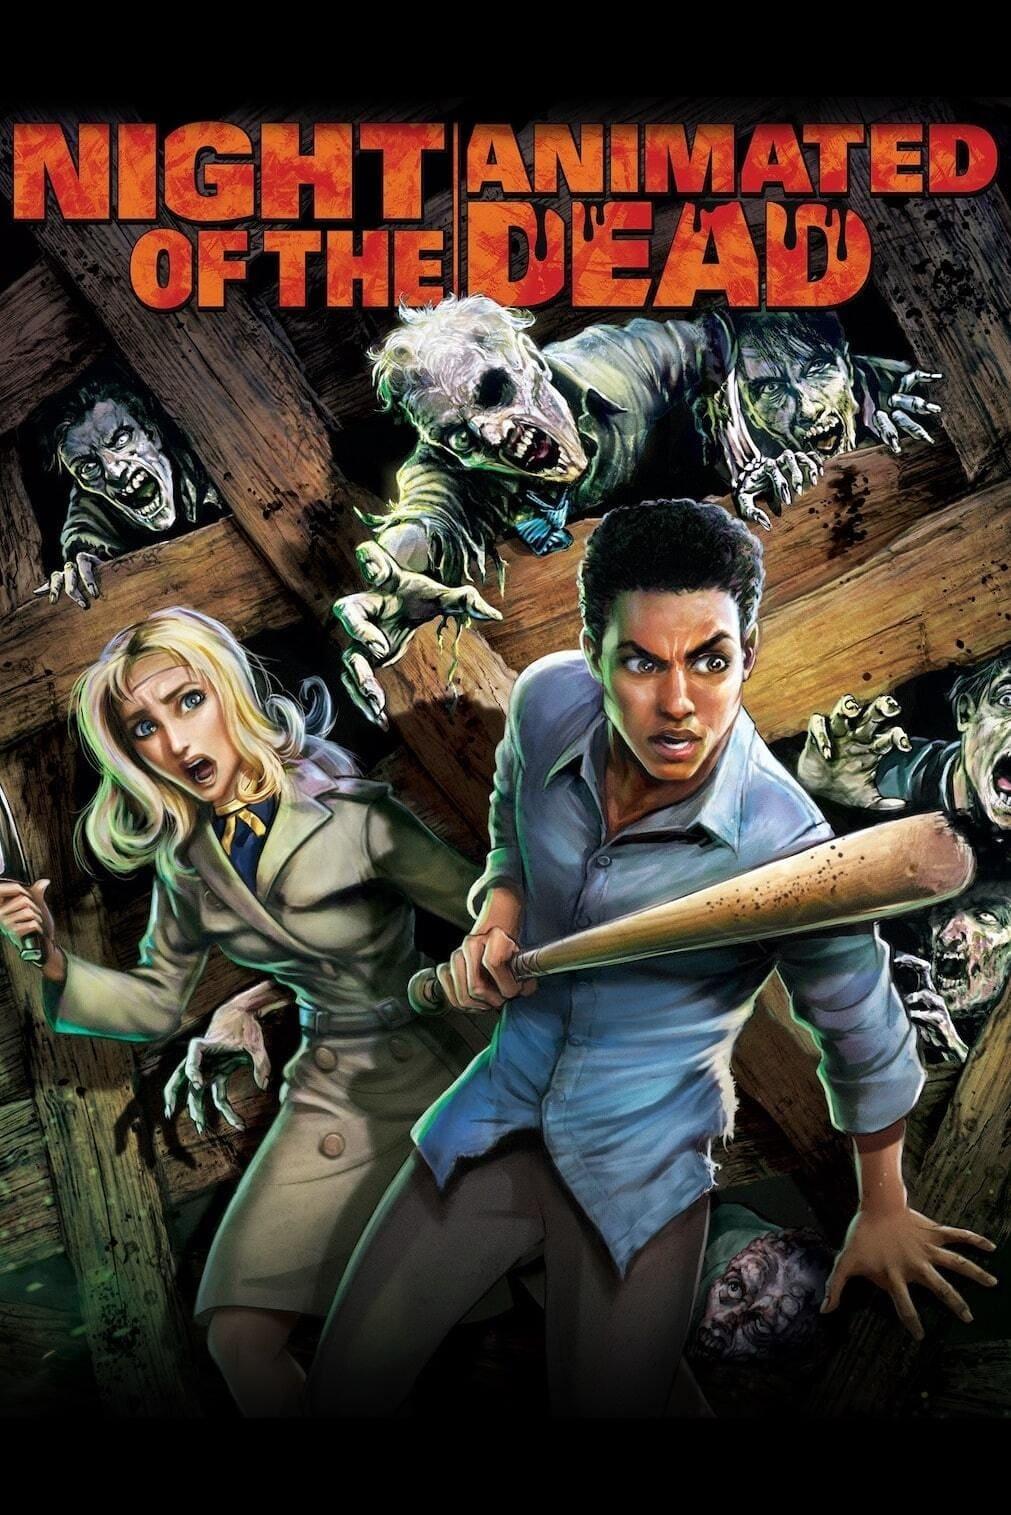 Night of the Animated Dead poster